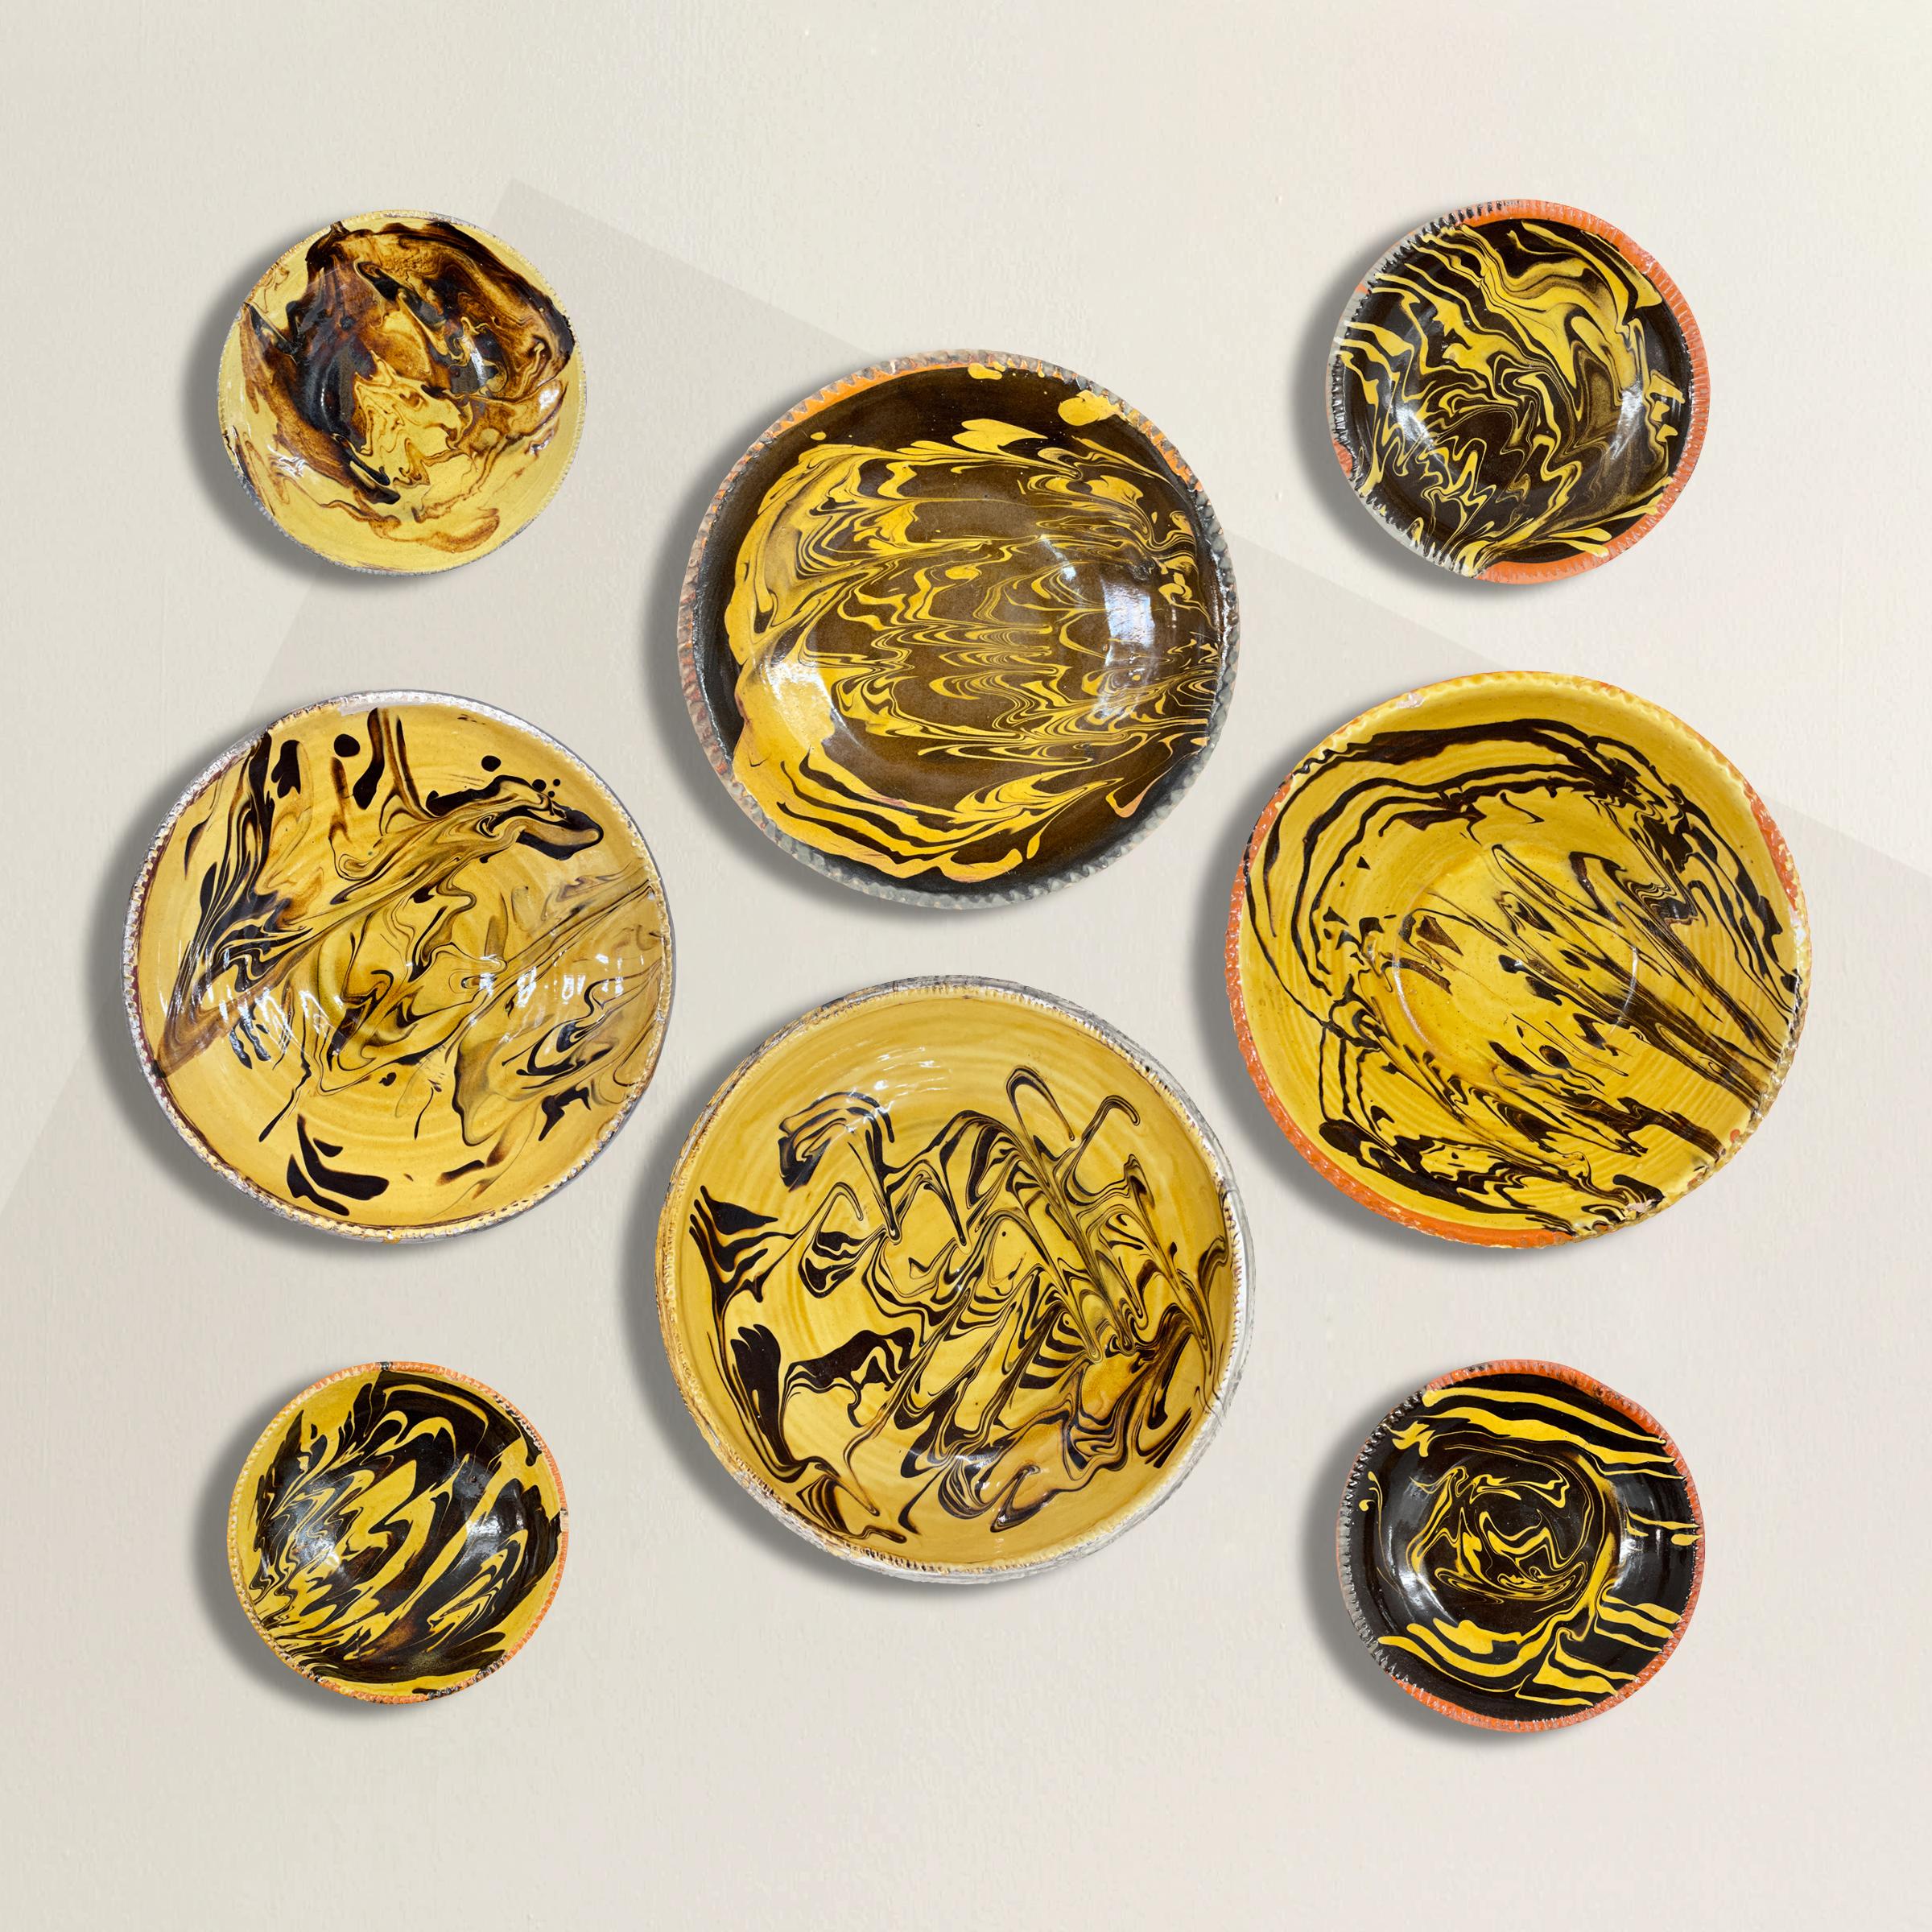 A striking set of eight 20th century French gold and brown swirl glazed terracotta bowls, and each with a custom steel wall mount so you can hang in your kitchen, pantry, dining room, or anywhere else you desire. 

Largest: 11 in. diameter x 2.5